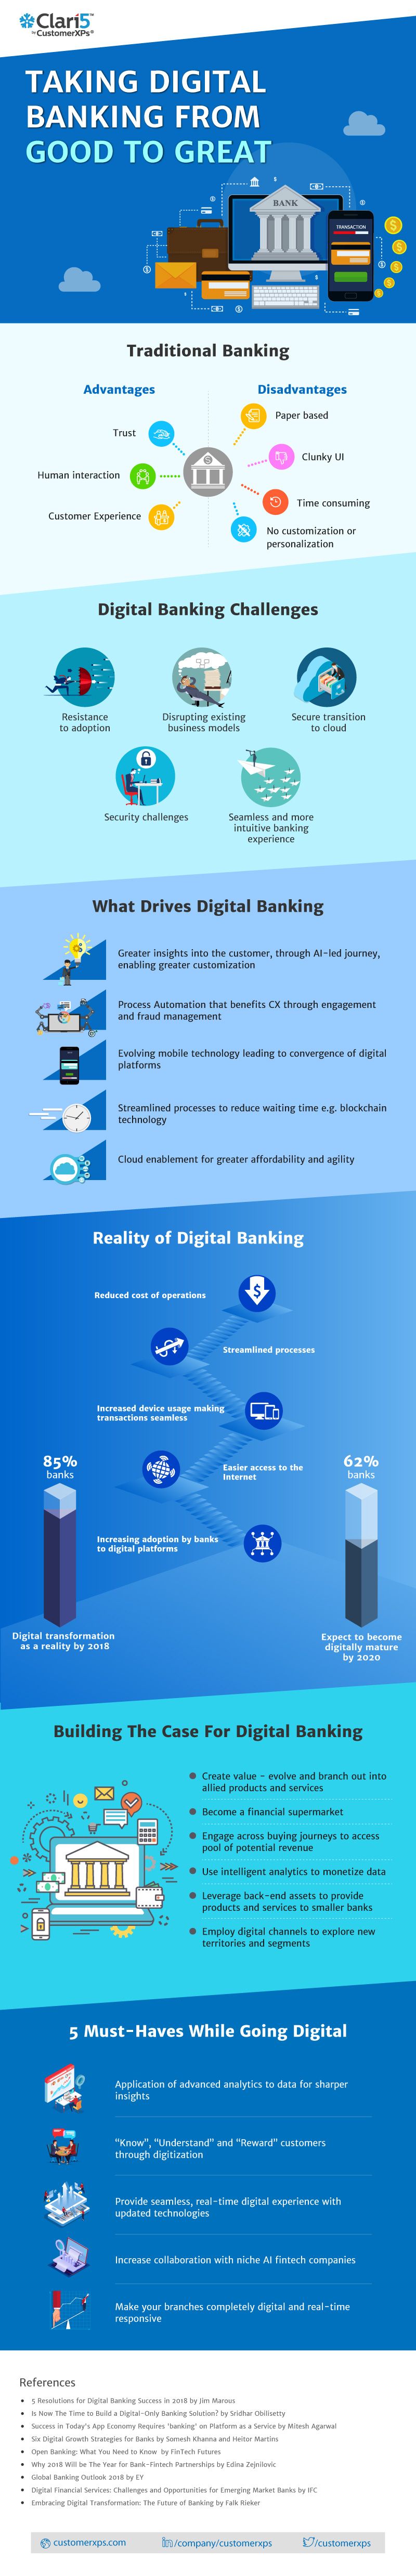 Taking Digital Banking from Good to Great